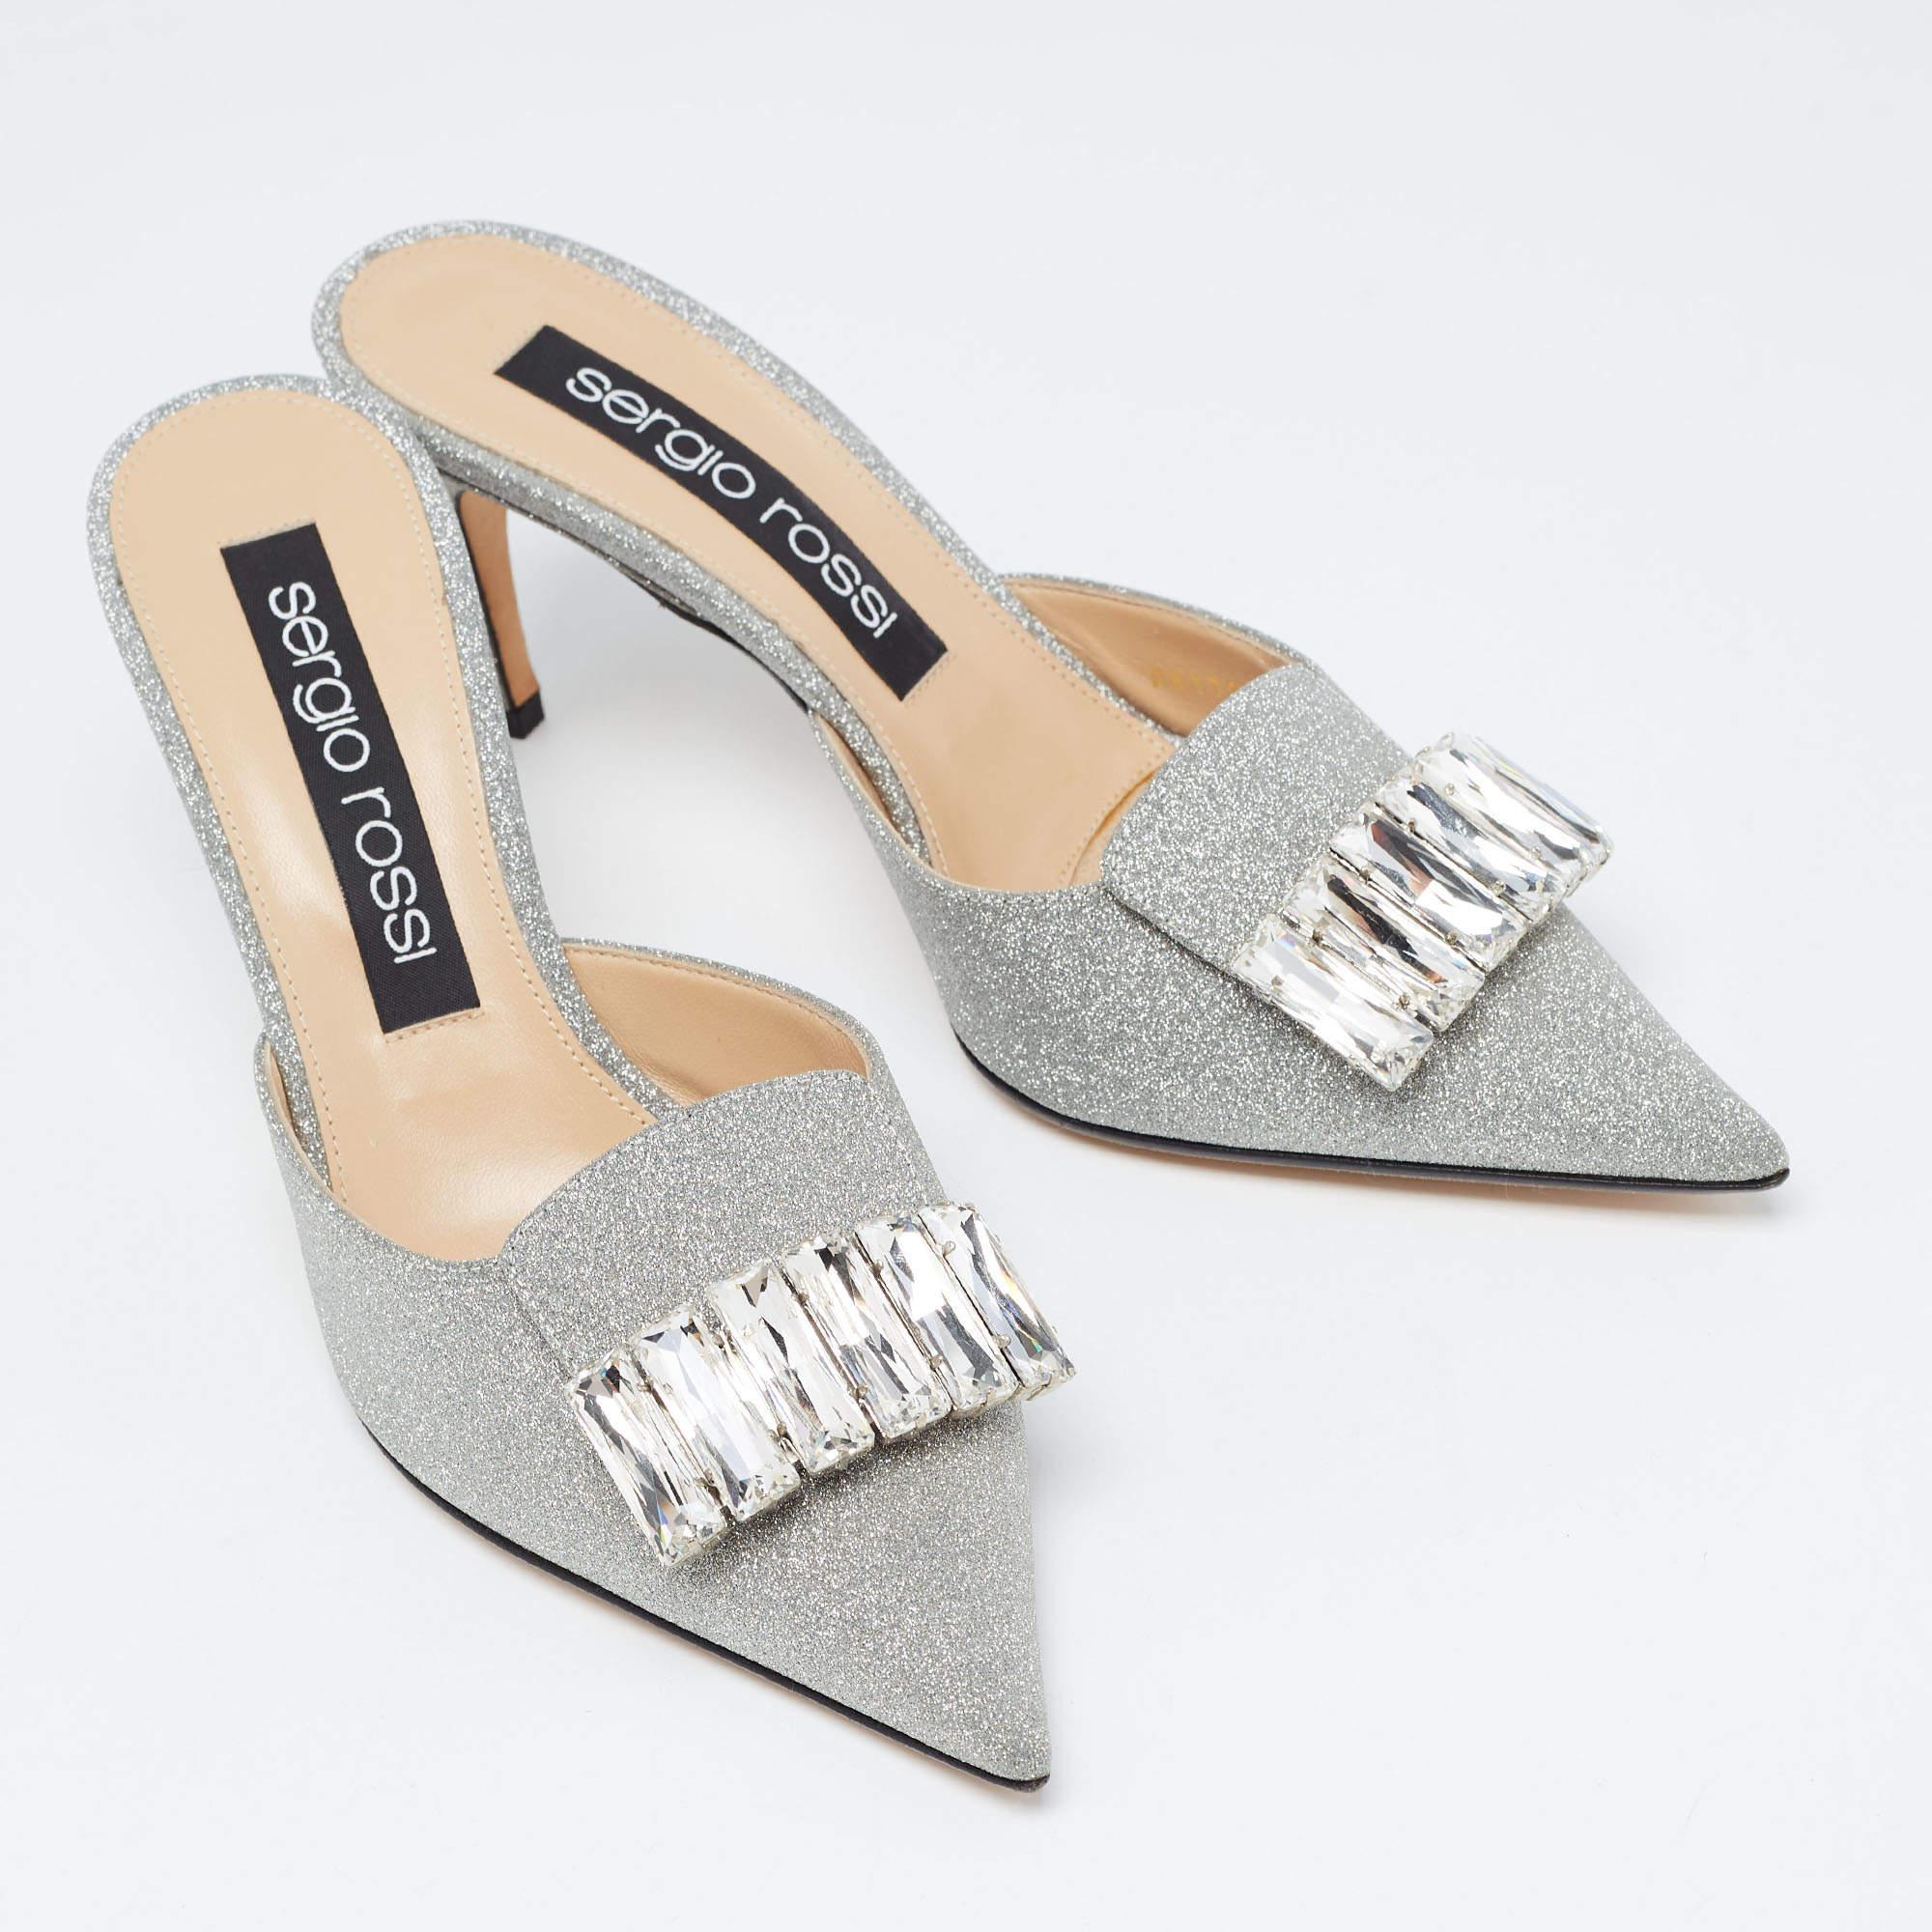 Sergio Rossi Silver Glitter Crystal Embellished Mules Size 40 In Excellent Condition For Sale In Dubai, Al Qouz 2